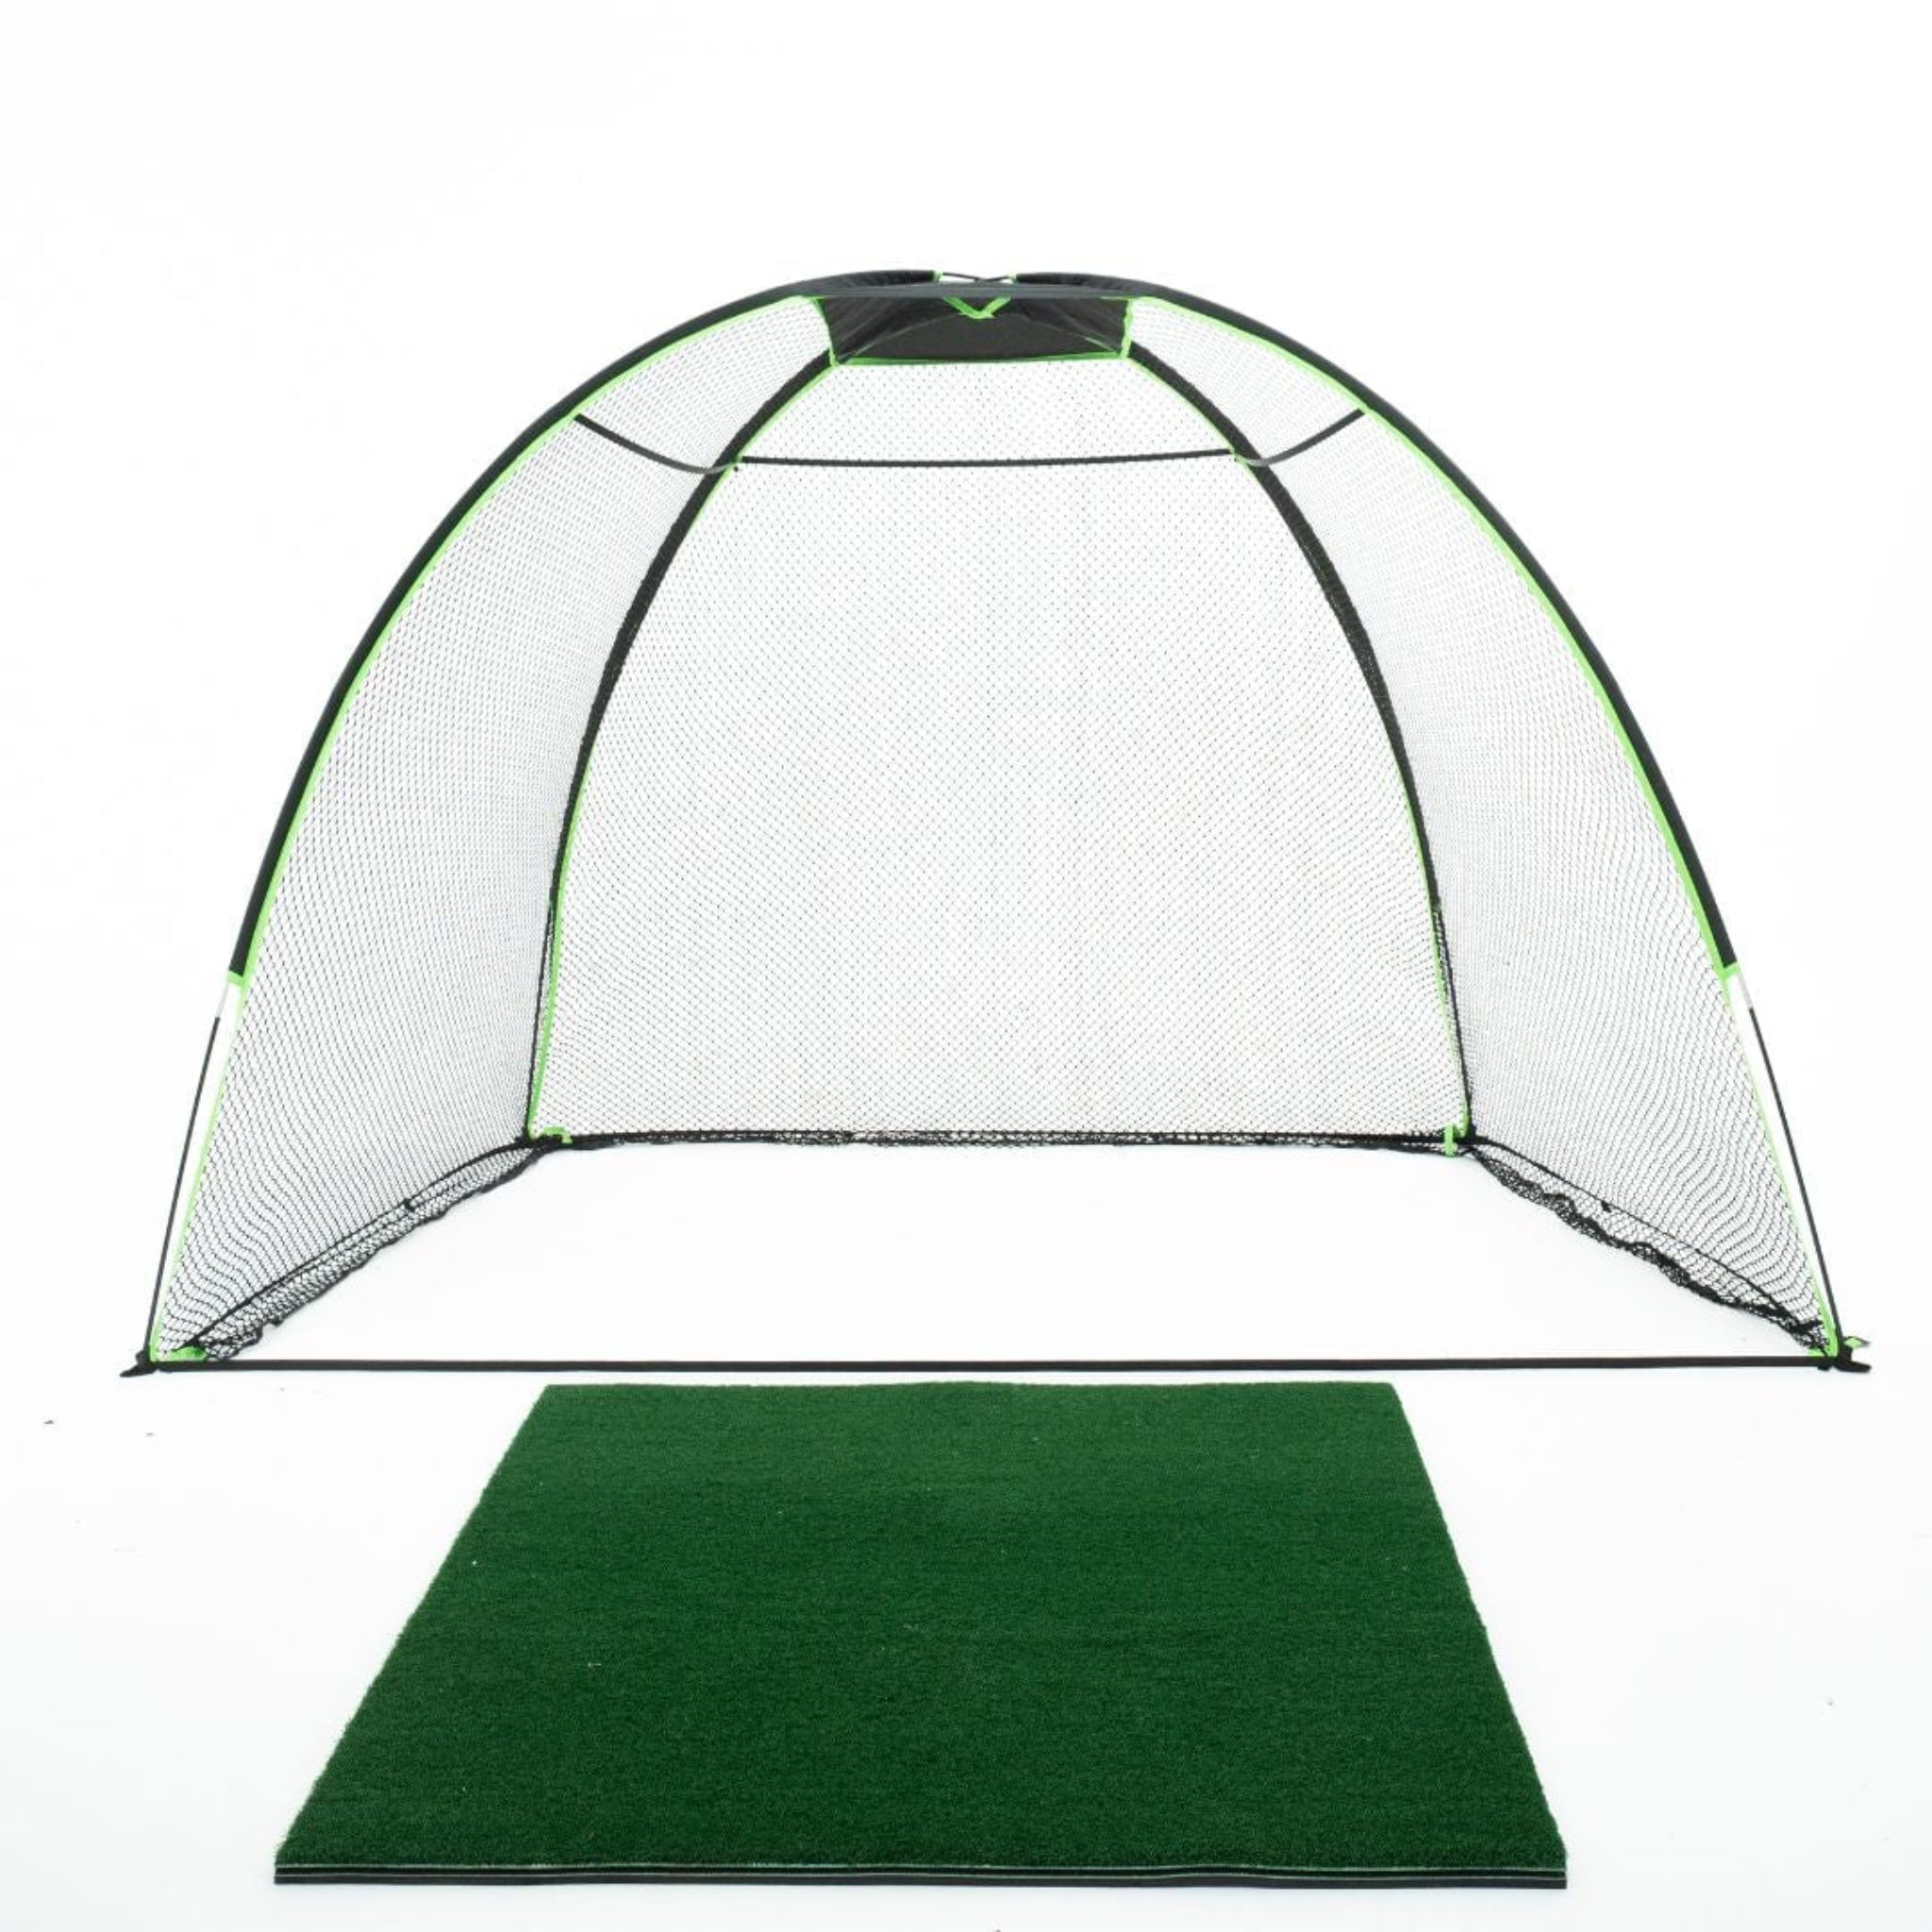 10' x 7' Rounded Golf Net